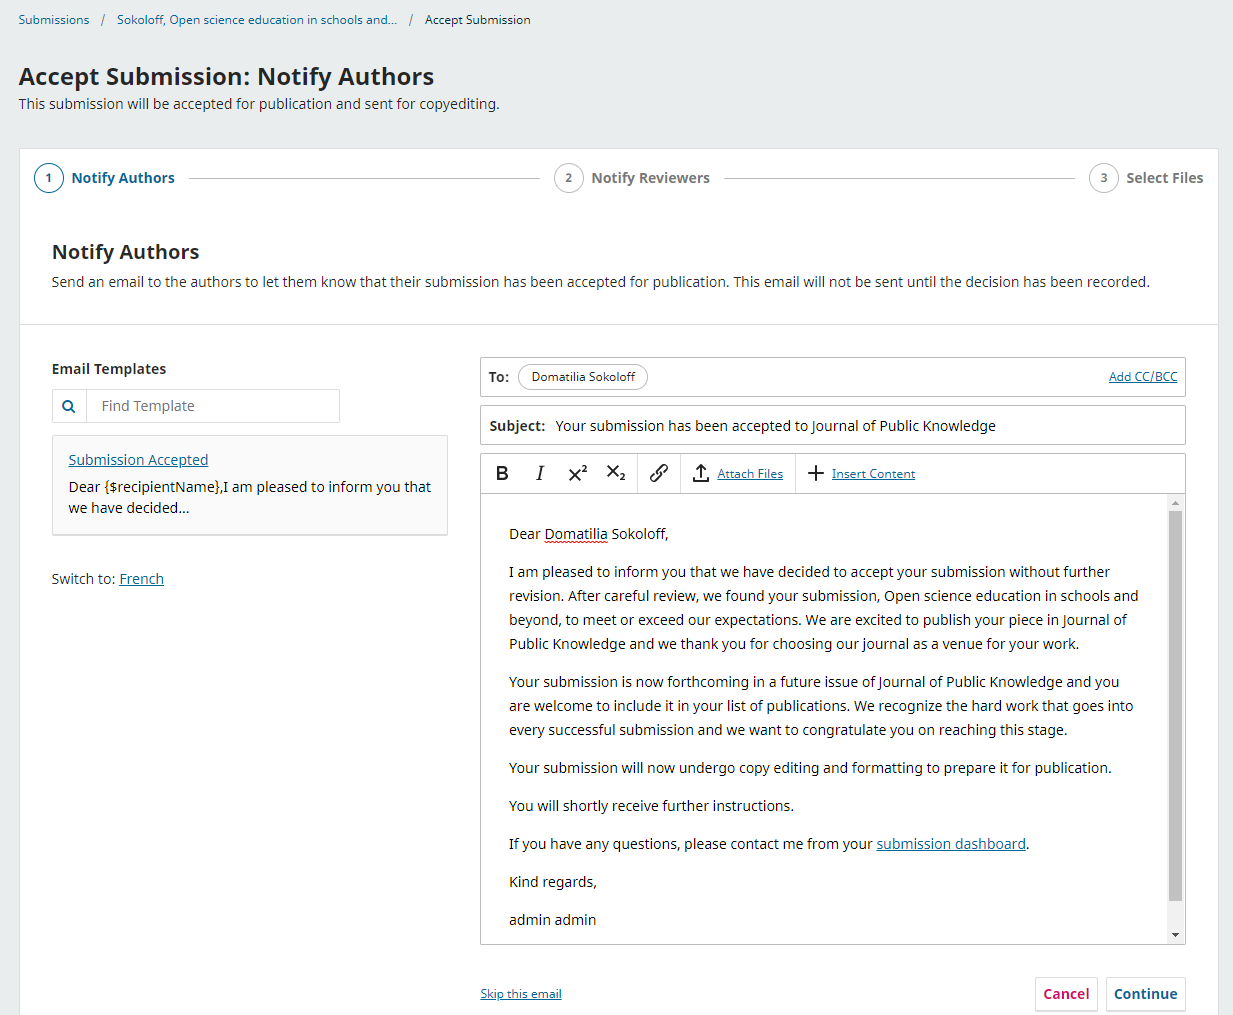 Accept submission author notification screen.